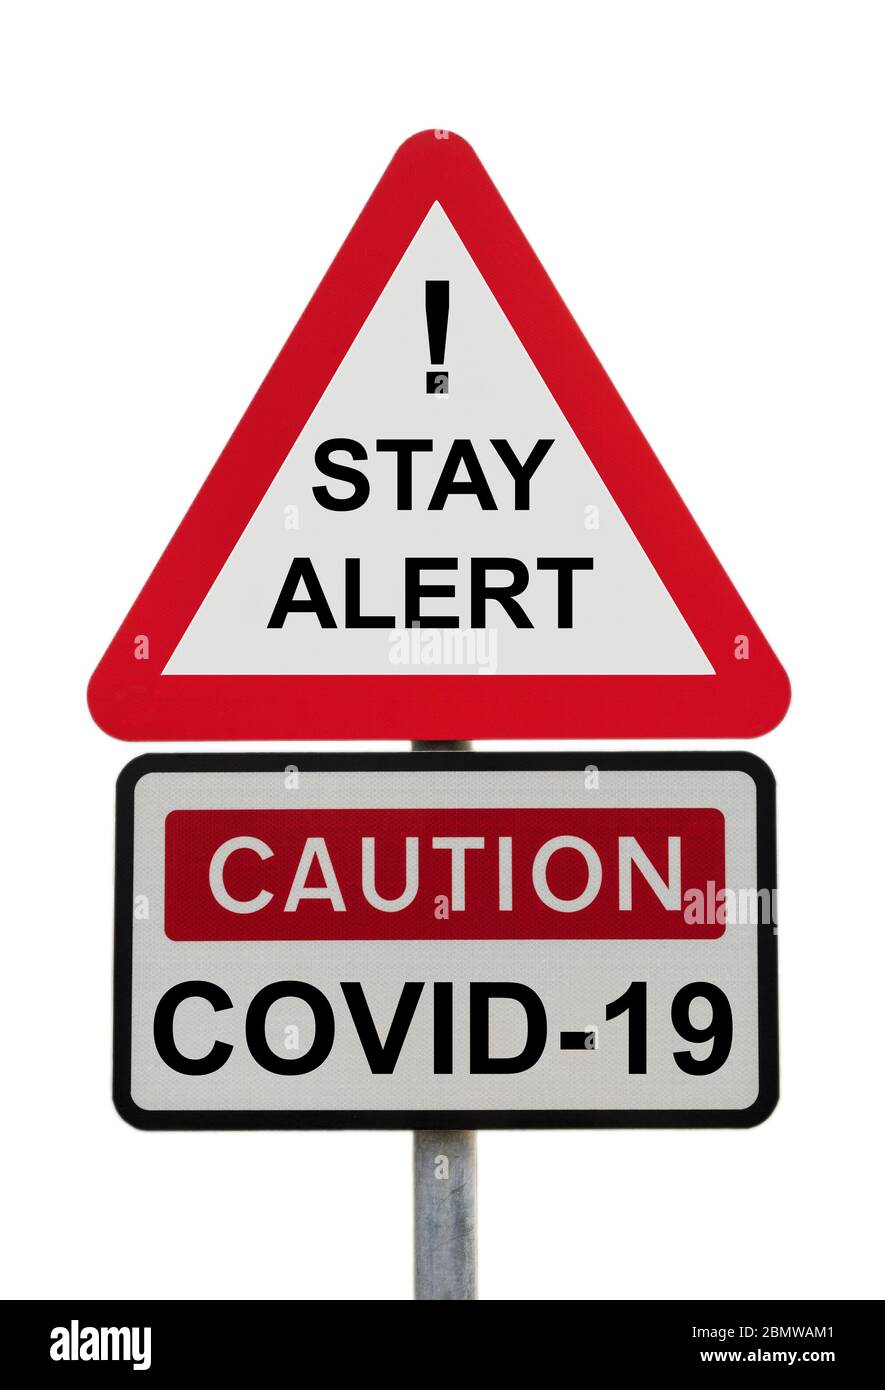 Triangular sign warning STAY ALERT with exclamation mark and caution COVID-19 to illustrate government's new coronavirus lockdown message. England UK Stock Photo